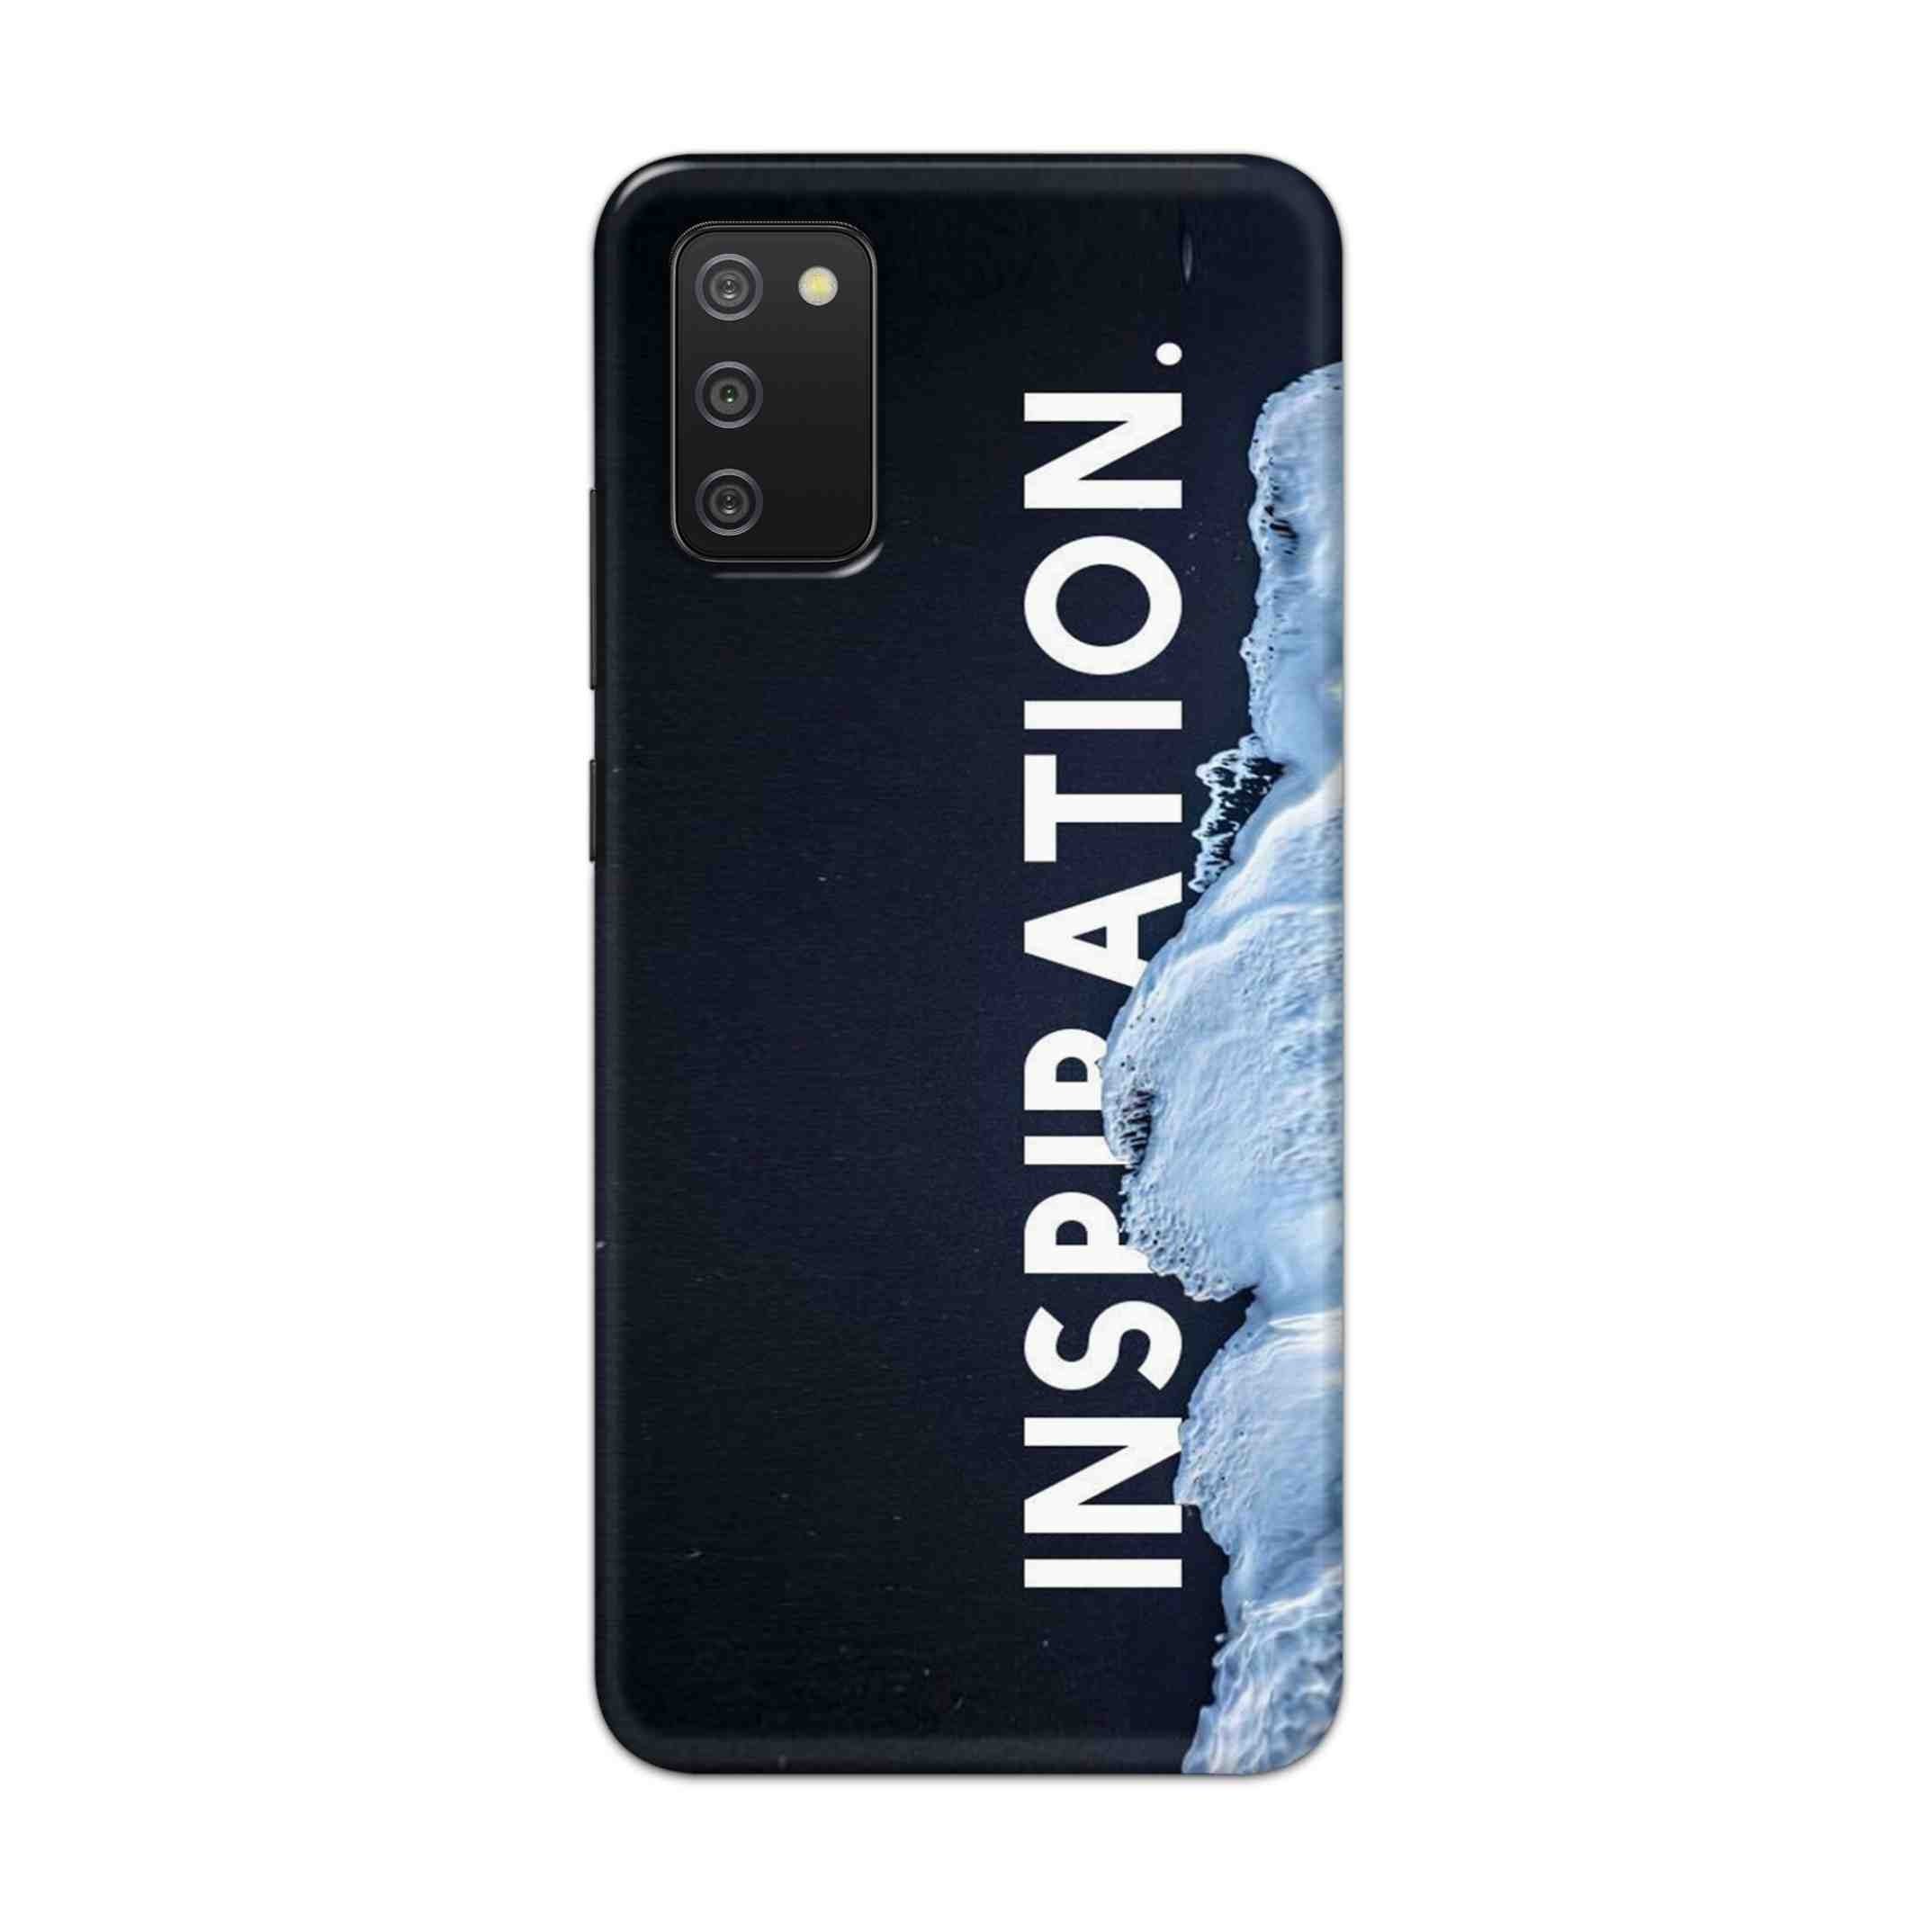 Buy Inspiration Hard Back Mobile Phone Case Cover For Samsung Galaxy M02s Online